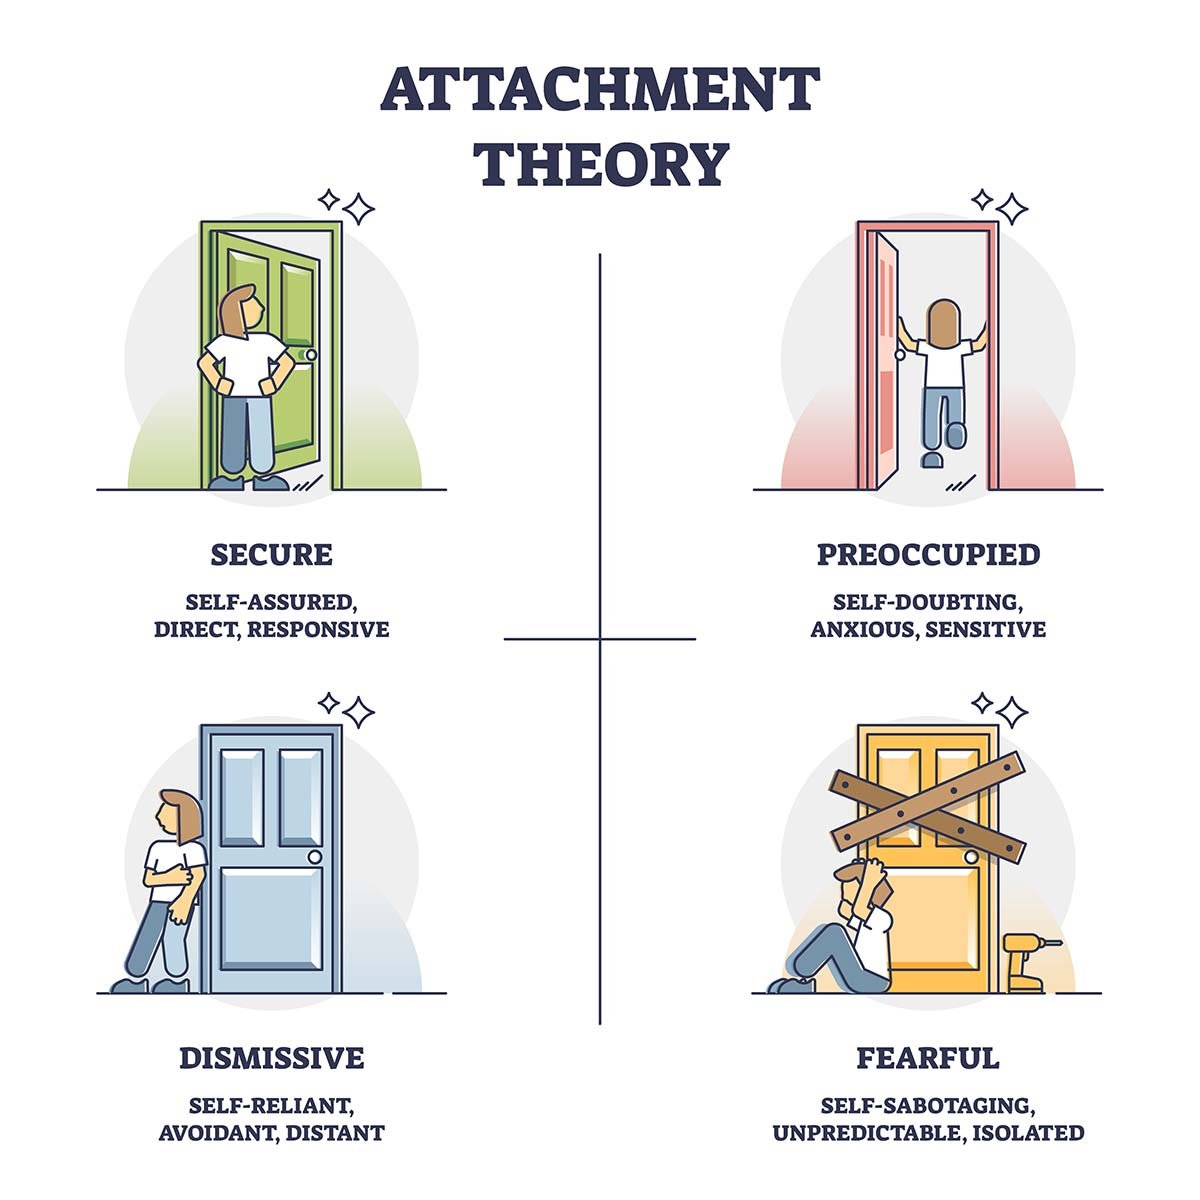 Attachment theory as secure, preoccupied, dismissive, fearful behavior models outline diagram. Labeled educational psychological types with influence from childhood parenting vector